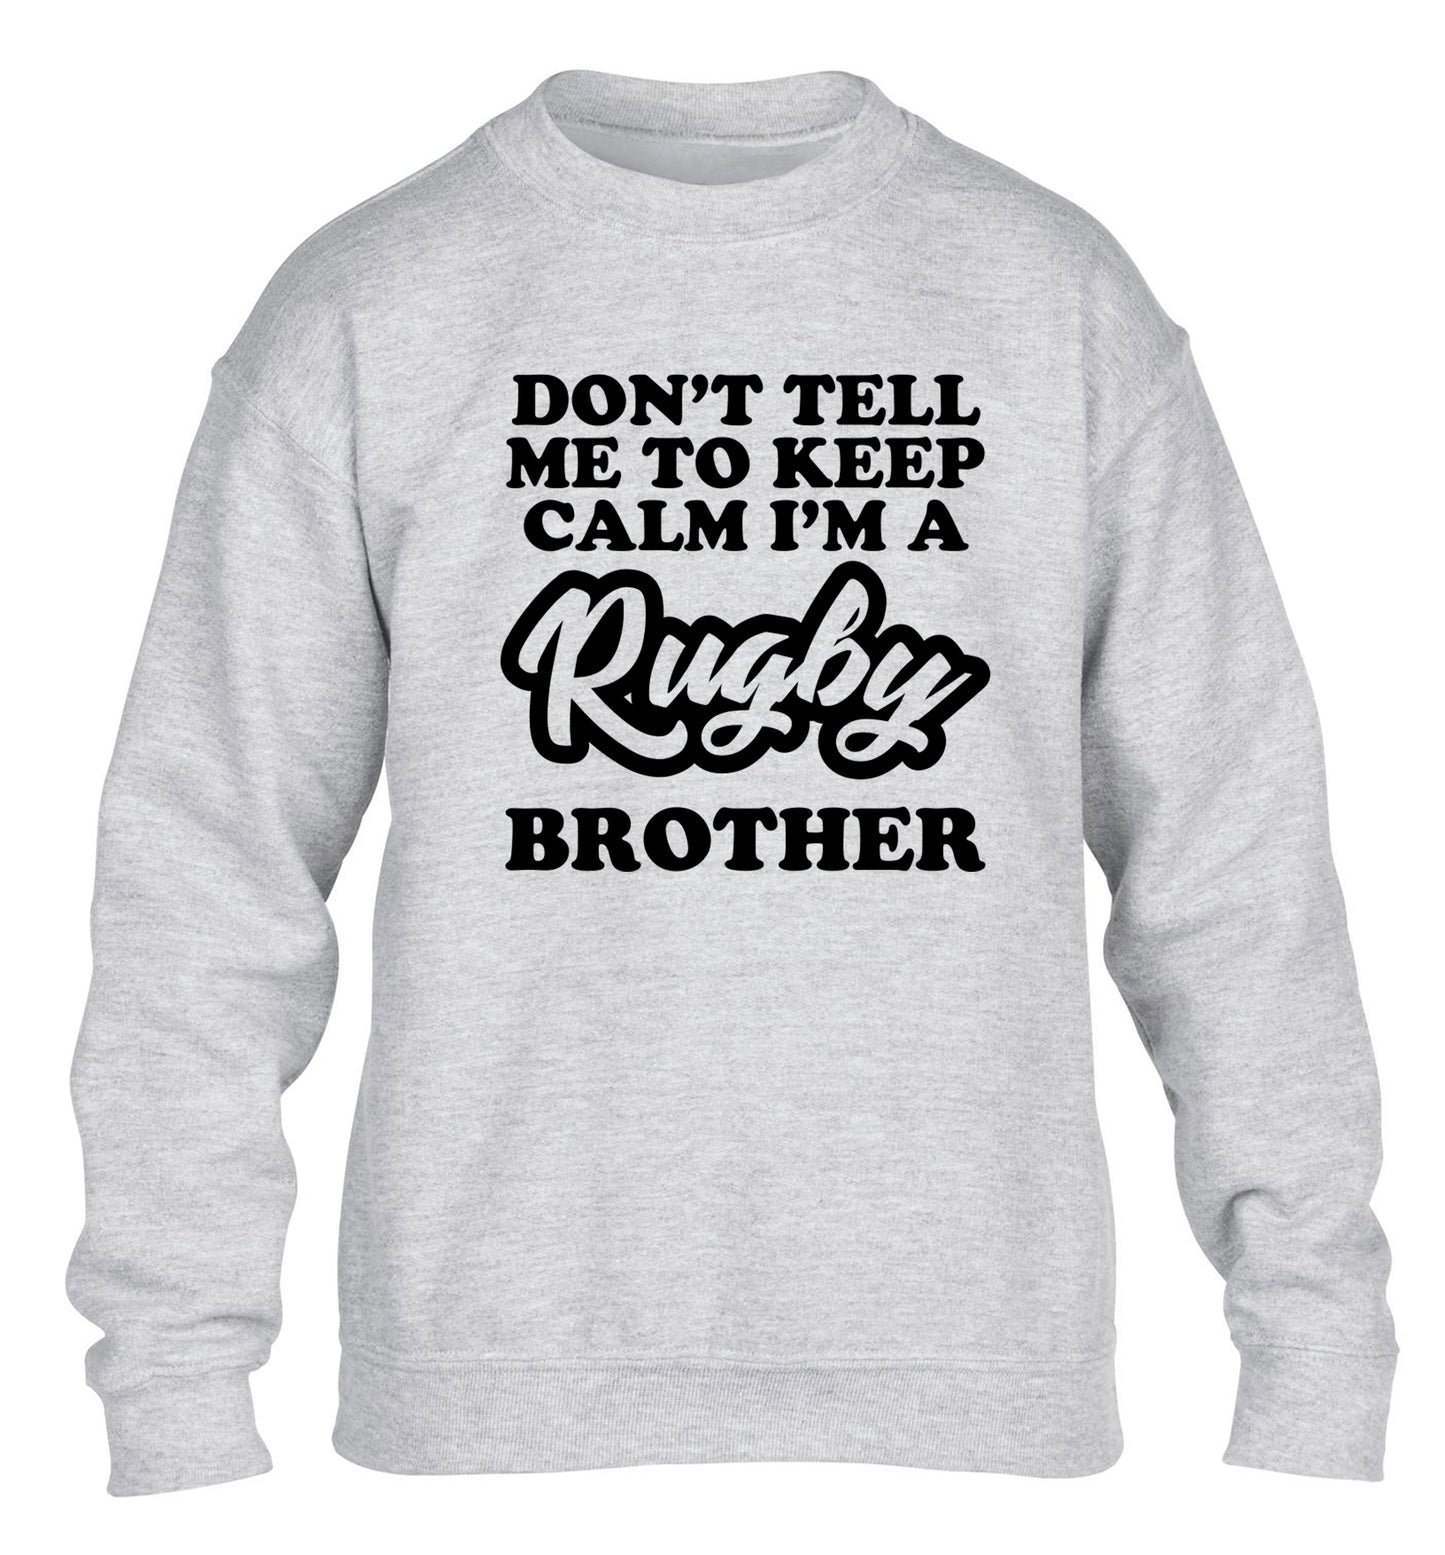 Don't tell me keep calm I'm a rugby brother children's grey sweater 12-13 Years